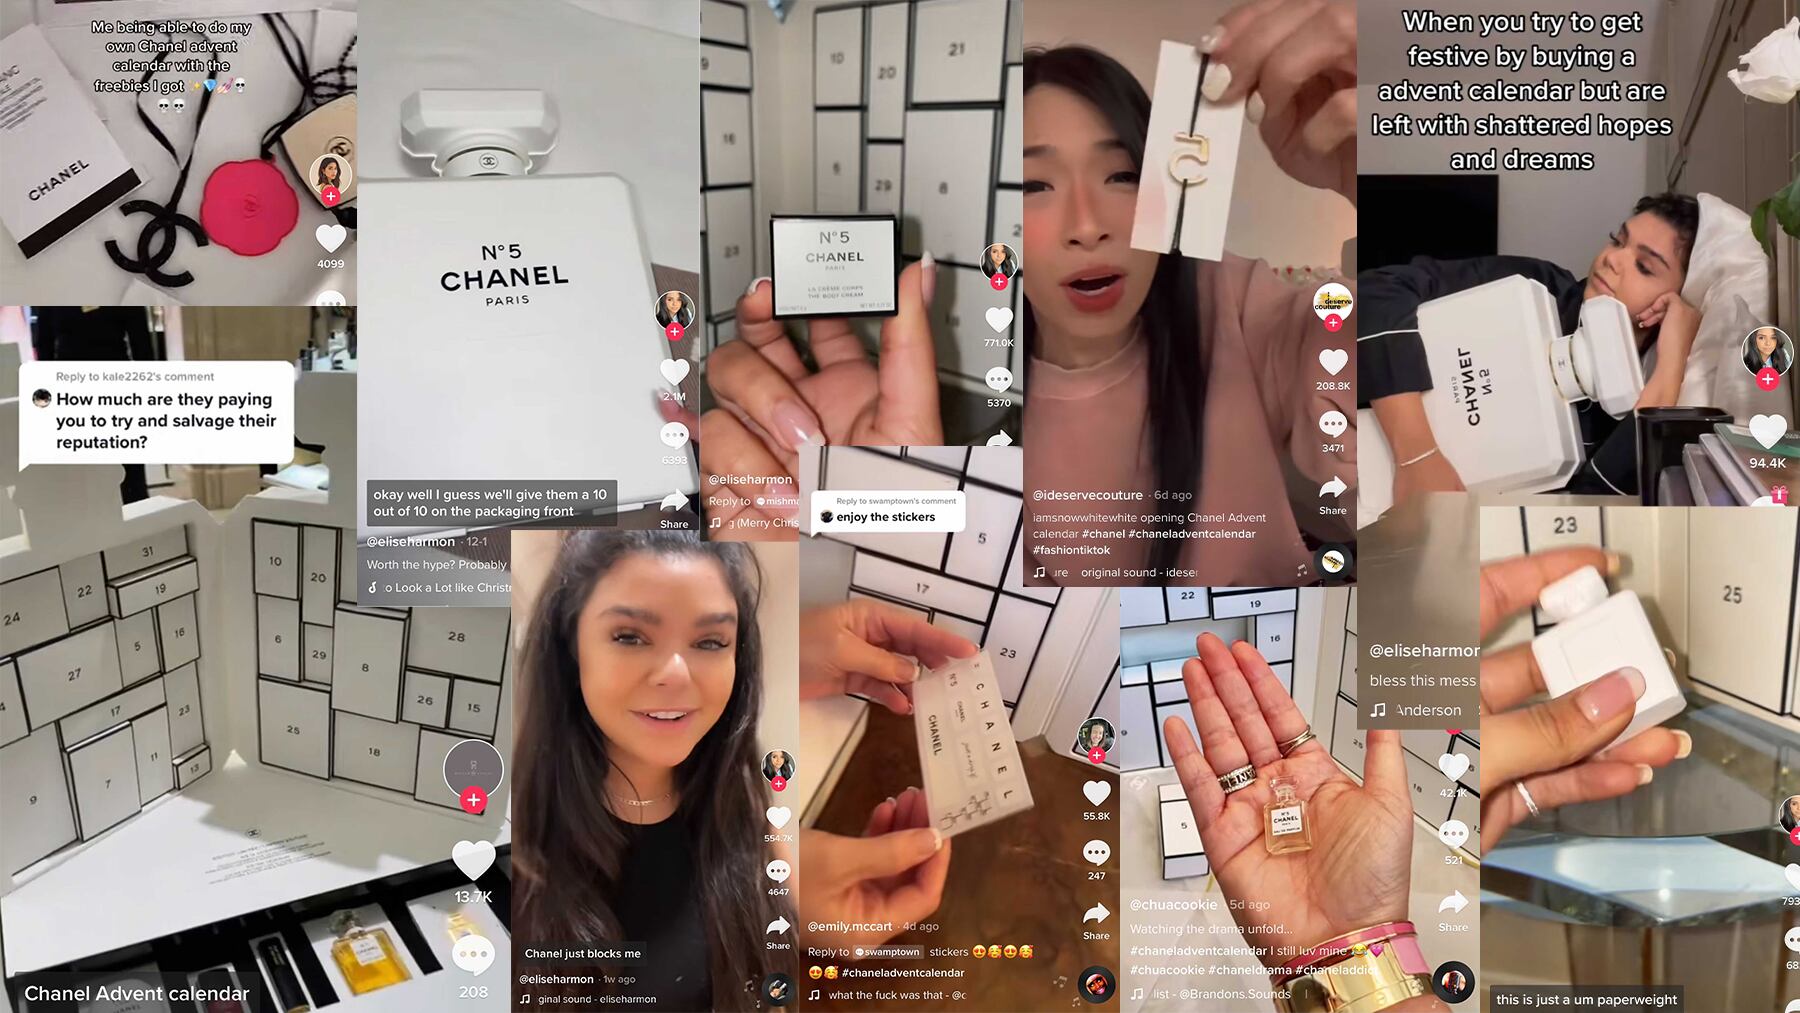 TikTok influencer Elise Harmon incited a stream of vitriol against Chanel's $825 advent calendar, generating more than 54 million views in a matter of days and inspiring others to post.